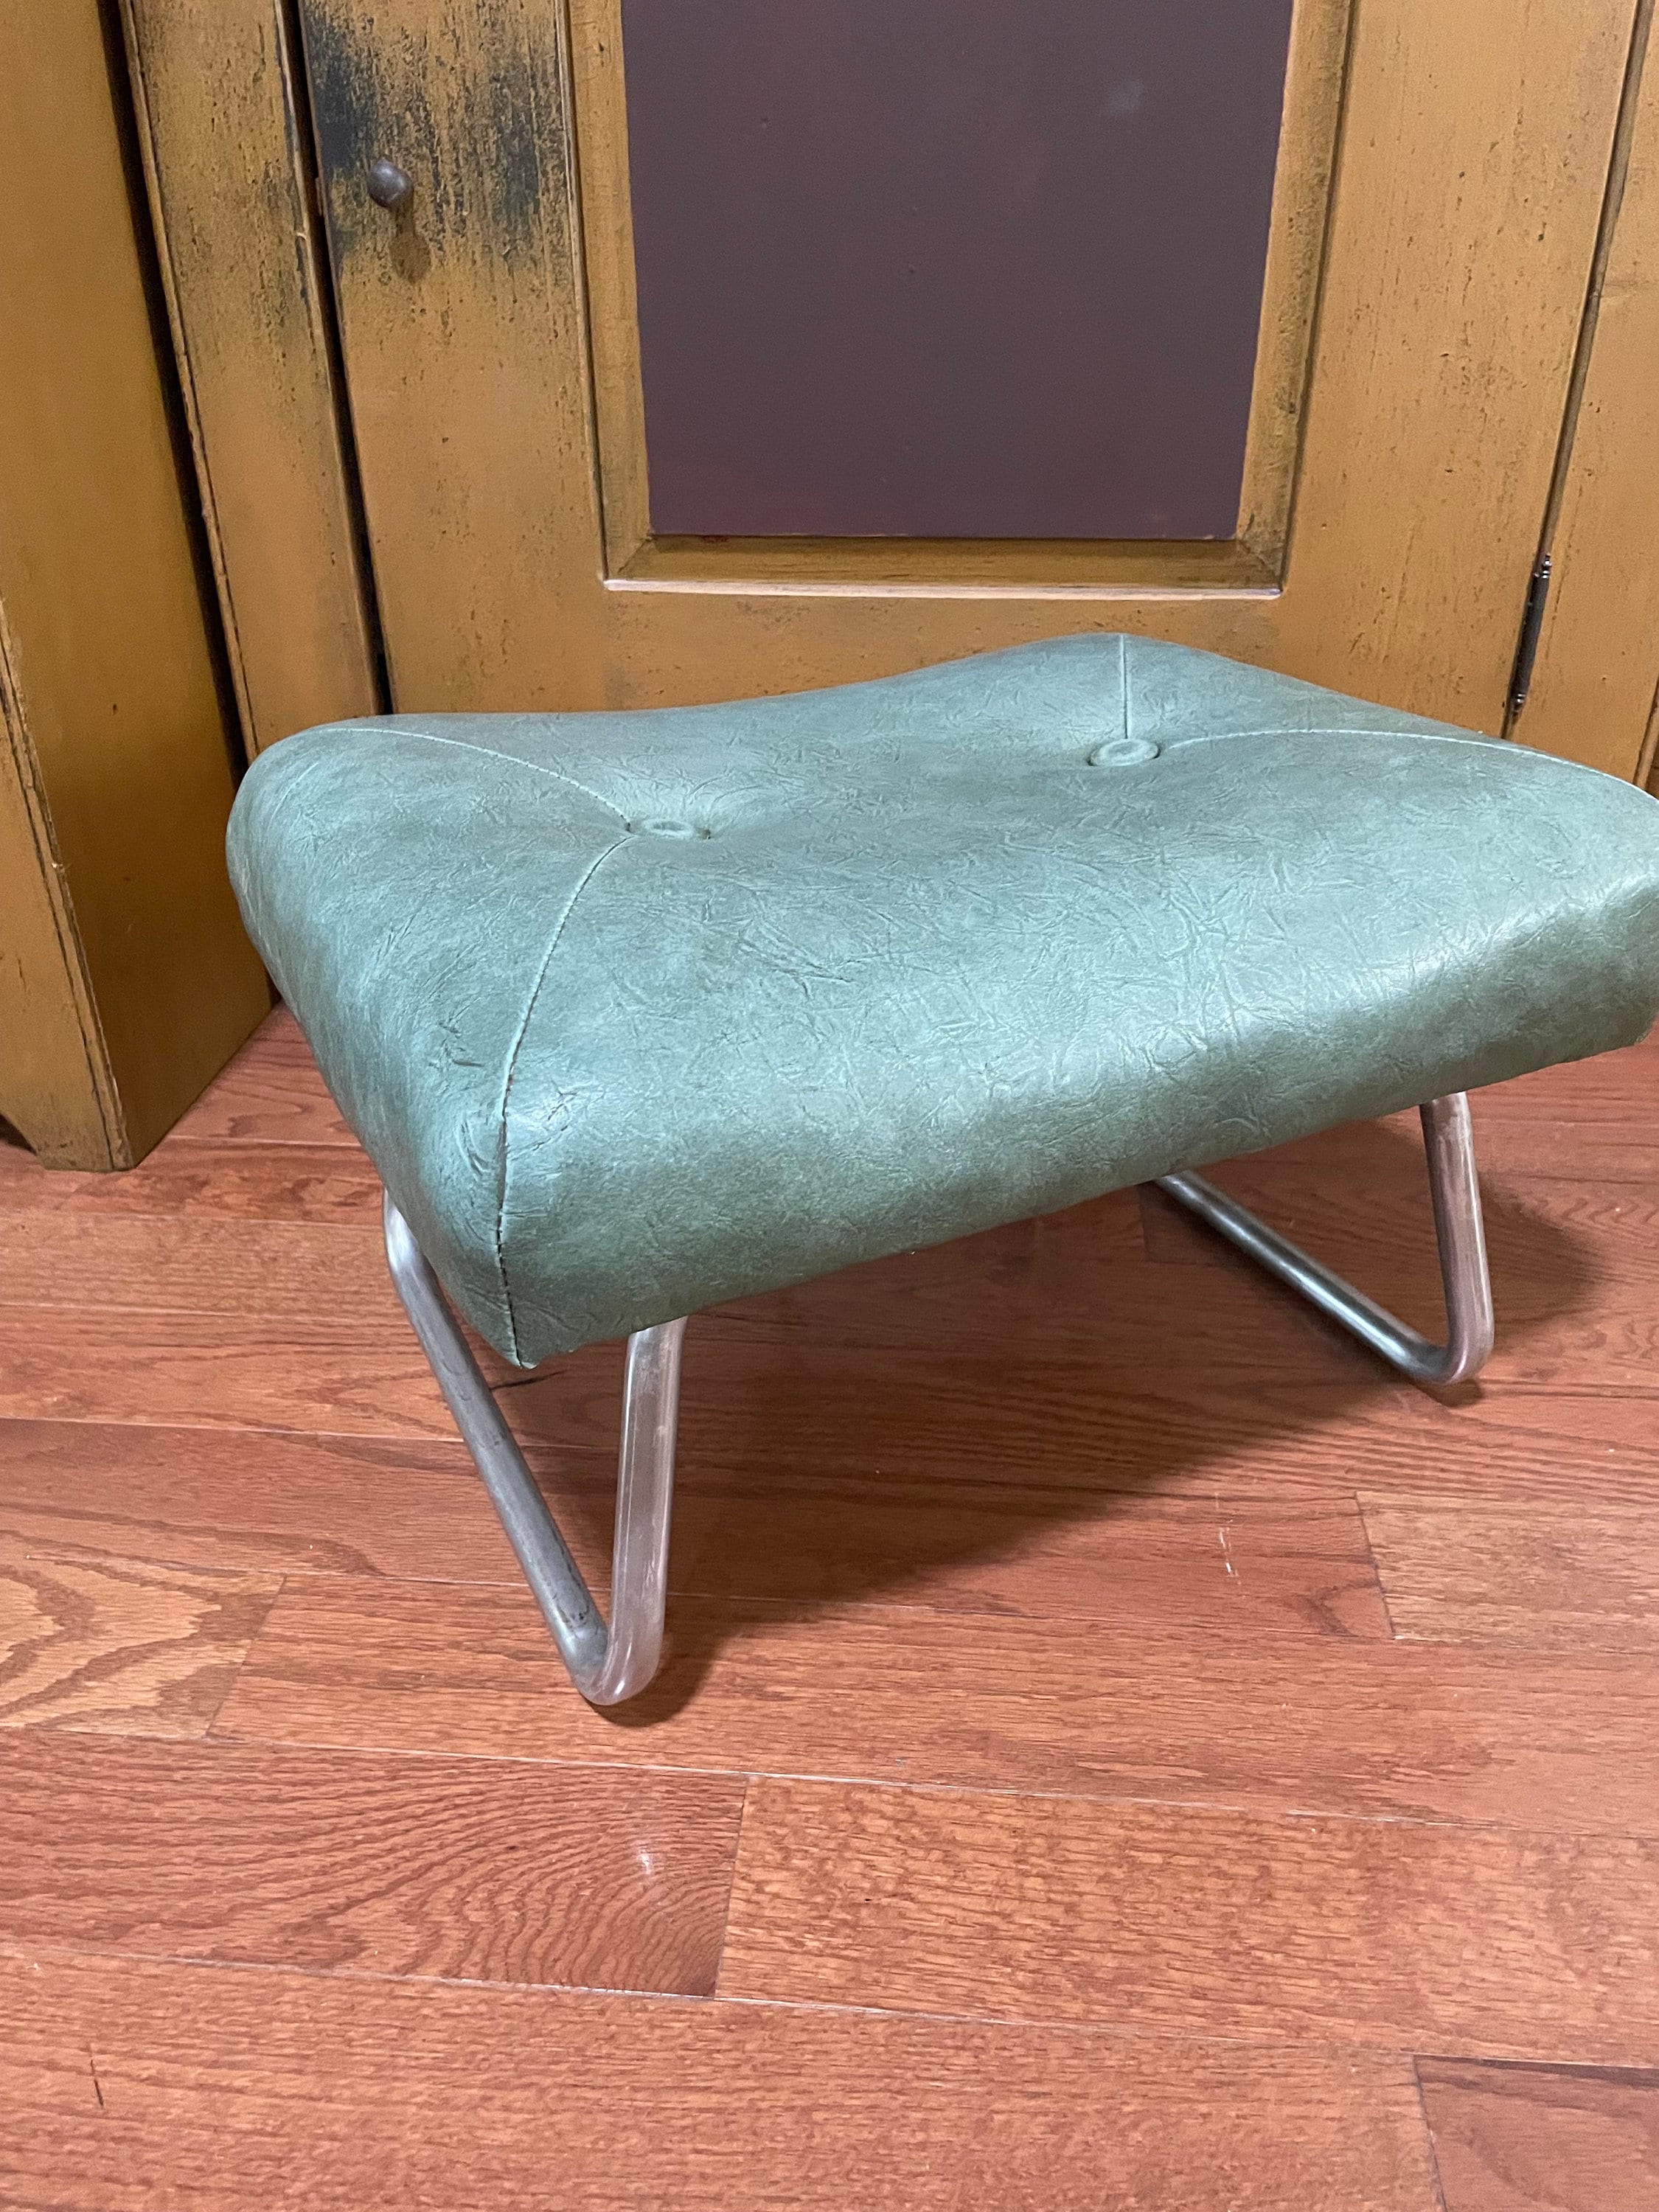 Desk Footrest Rocking Footstool Office Foot Rest Work From Home in Style  Exercise ADHD Restless Legs Mid Century Modern SK8REST 